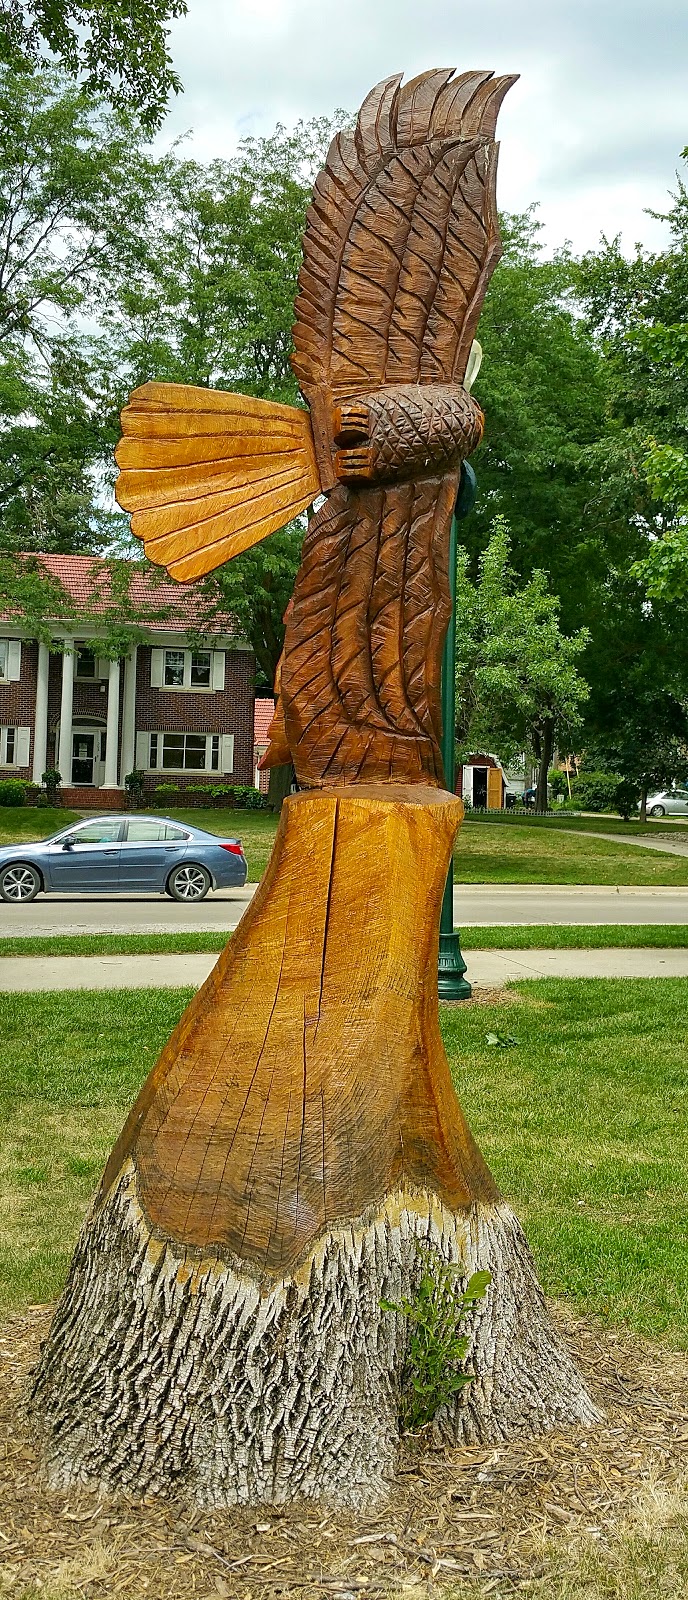 History and Culture by Bicycle: Storm Lake, Iowa: Carved Eagle Sculpture